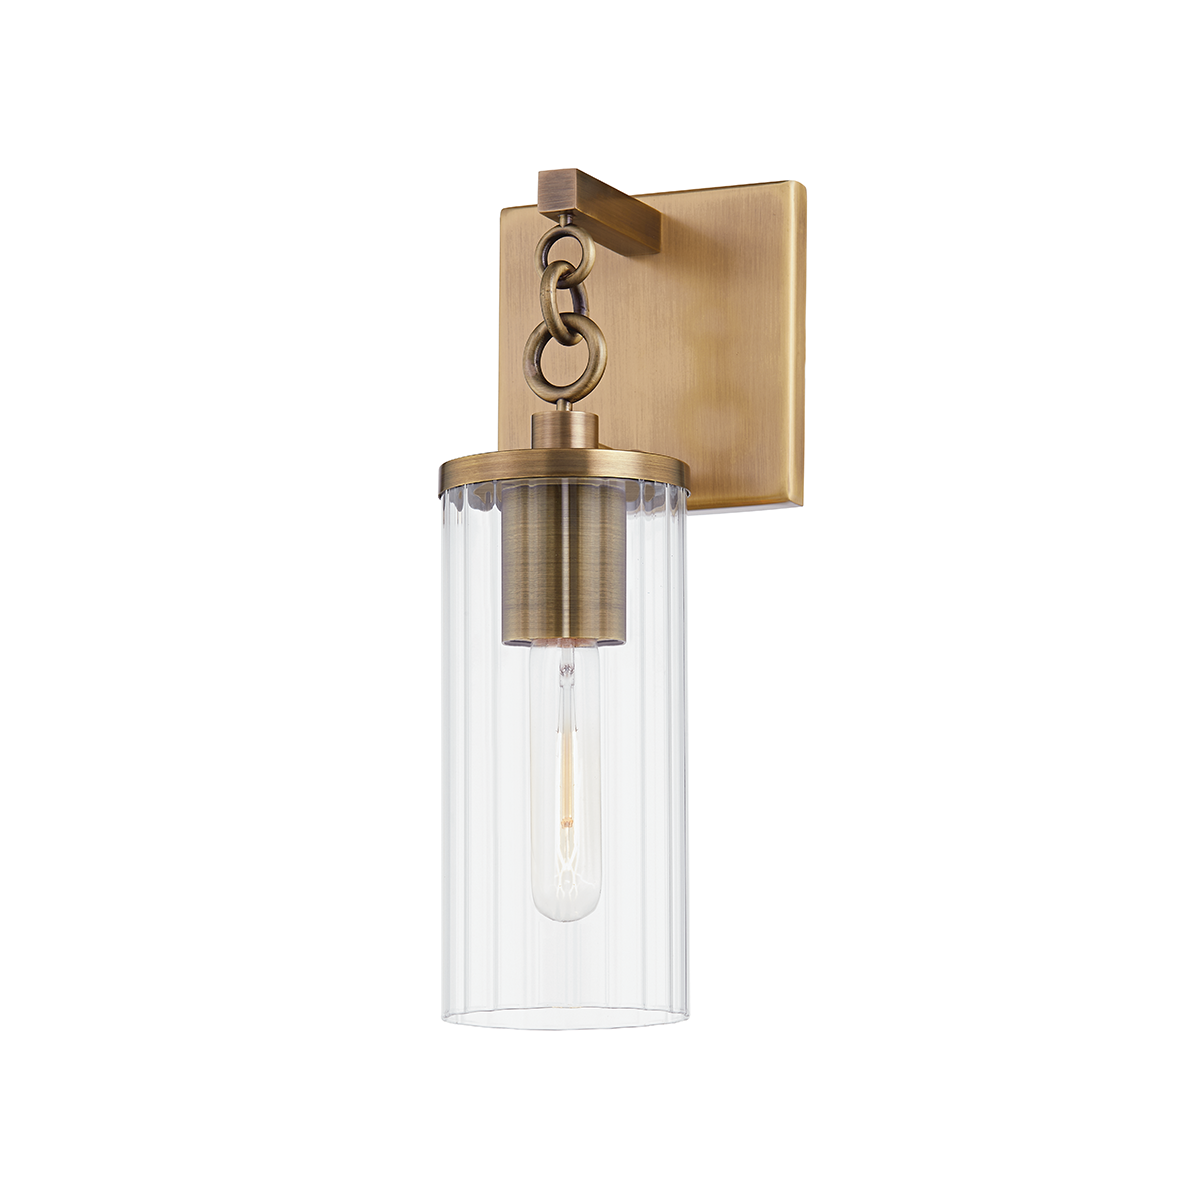 Troy YUCCA 1 LIGHT SMALL EXTERIOR WALL SCONCE B6121 Outdoor l Wall Troy Lighting   